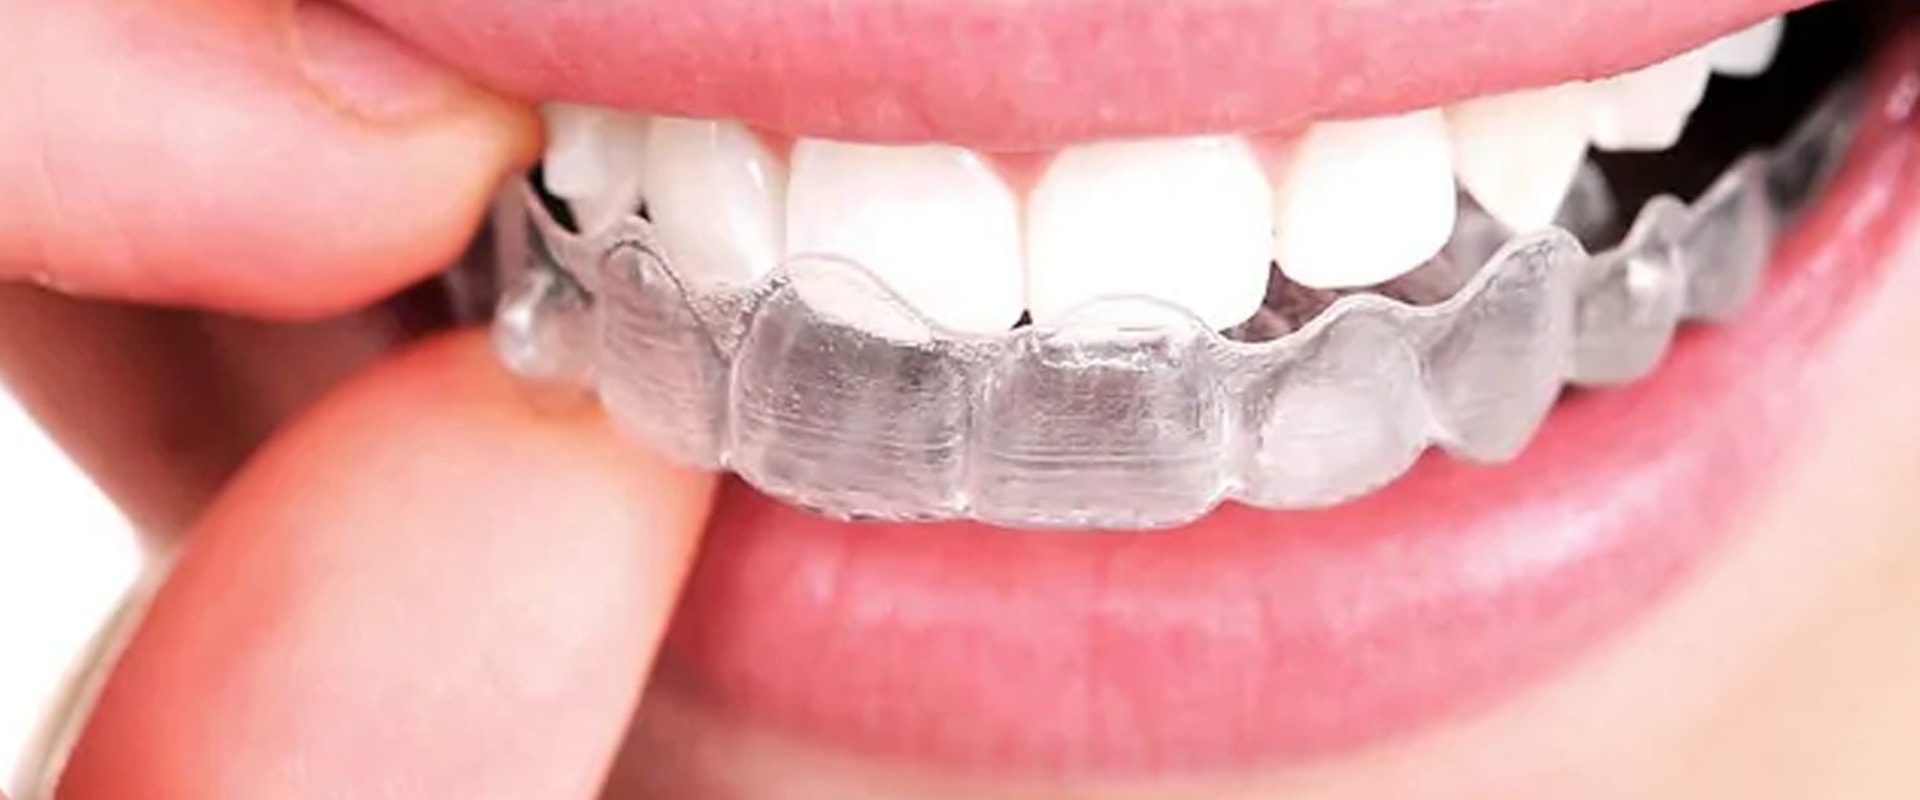 What is the lowest price for invisalign?